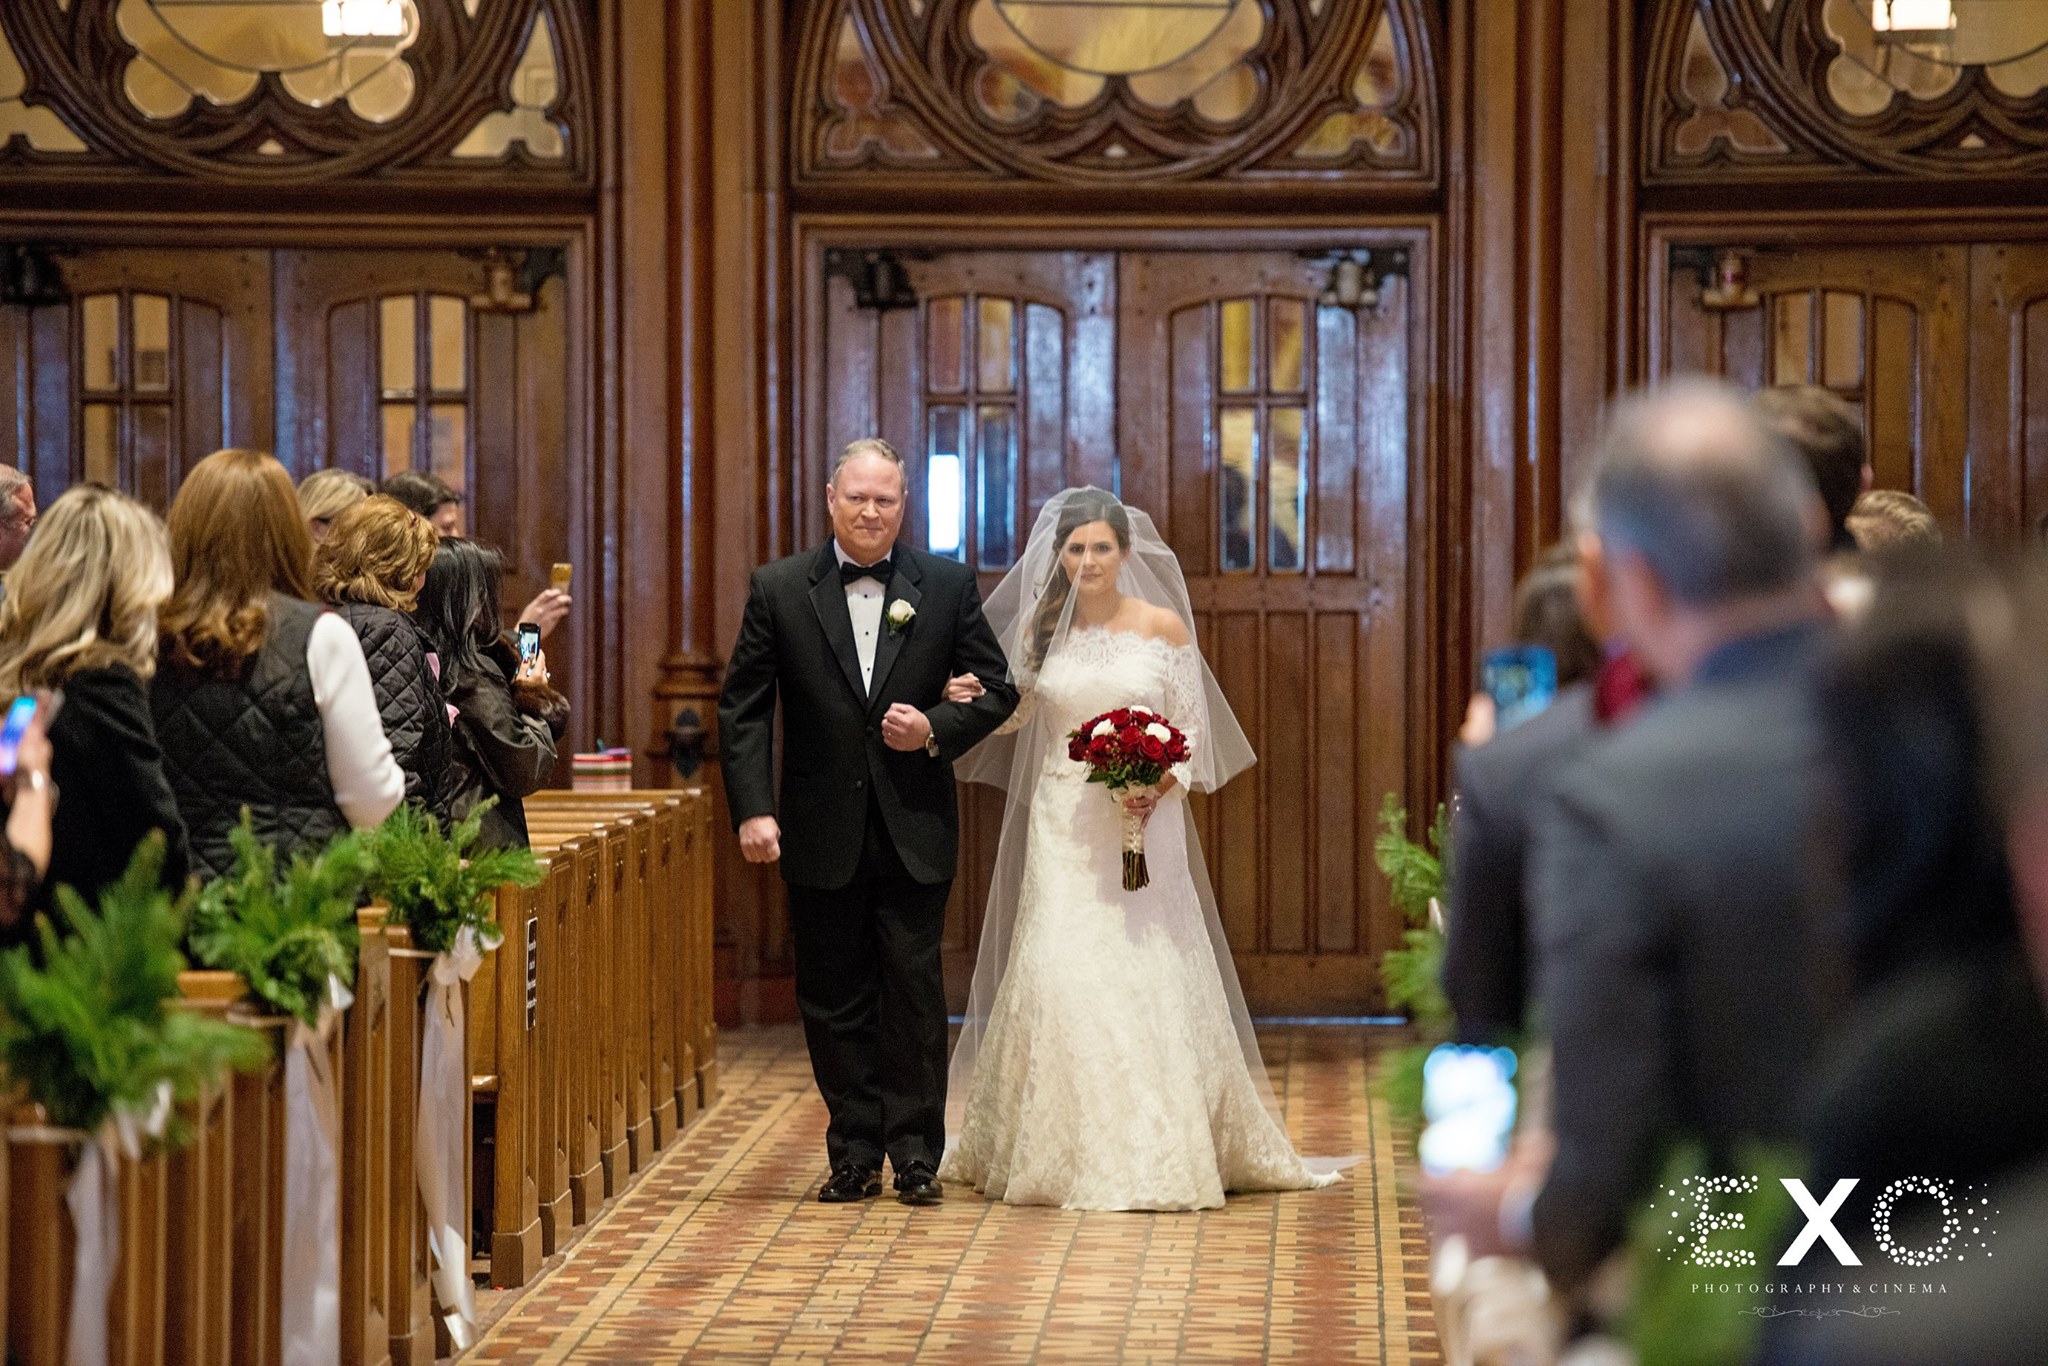 bride in Kleinfeld Bridal gown walking down aisle of church ceremony